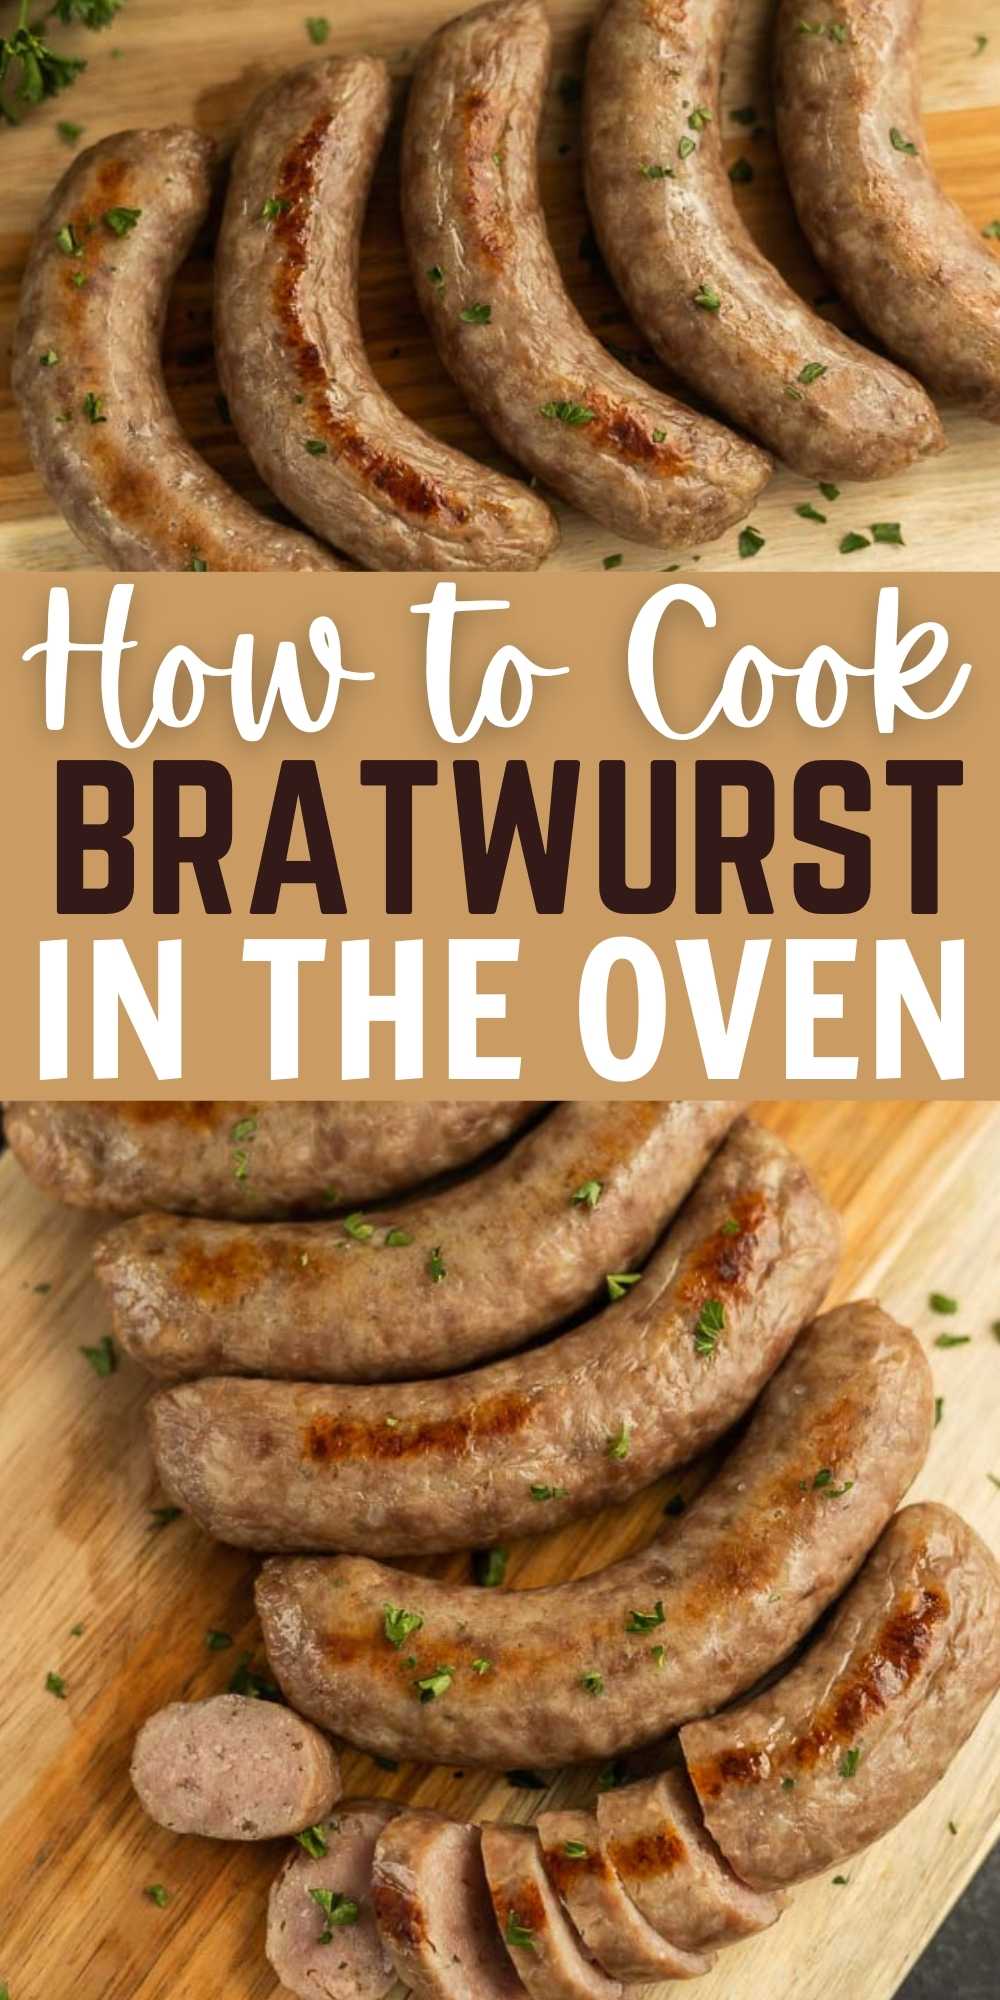 If you are unable to grill your bratwurst, these steps will show you How to Cook Brats in the oven. Moist, delicious and easy to prepare. Cooking bratwurst in the oven in easy and they will be ready is under 20 minutes! #eatingonadime #bratrecipes #ovenrecipes #bratwurstrecipes 
